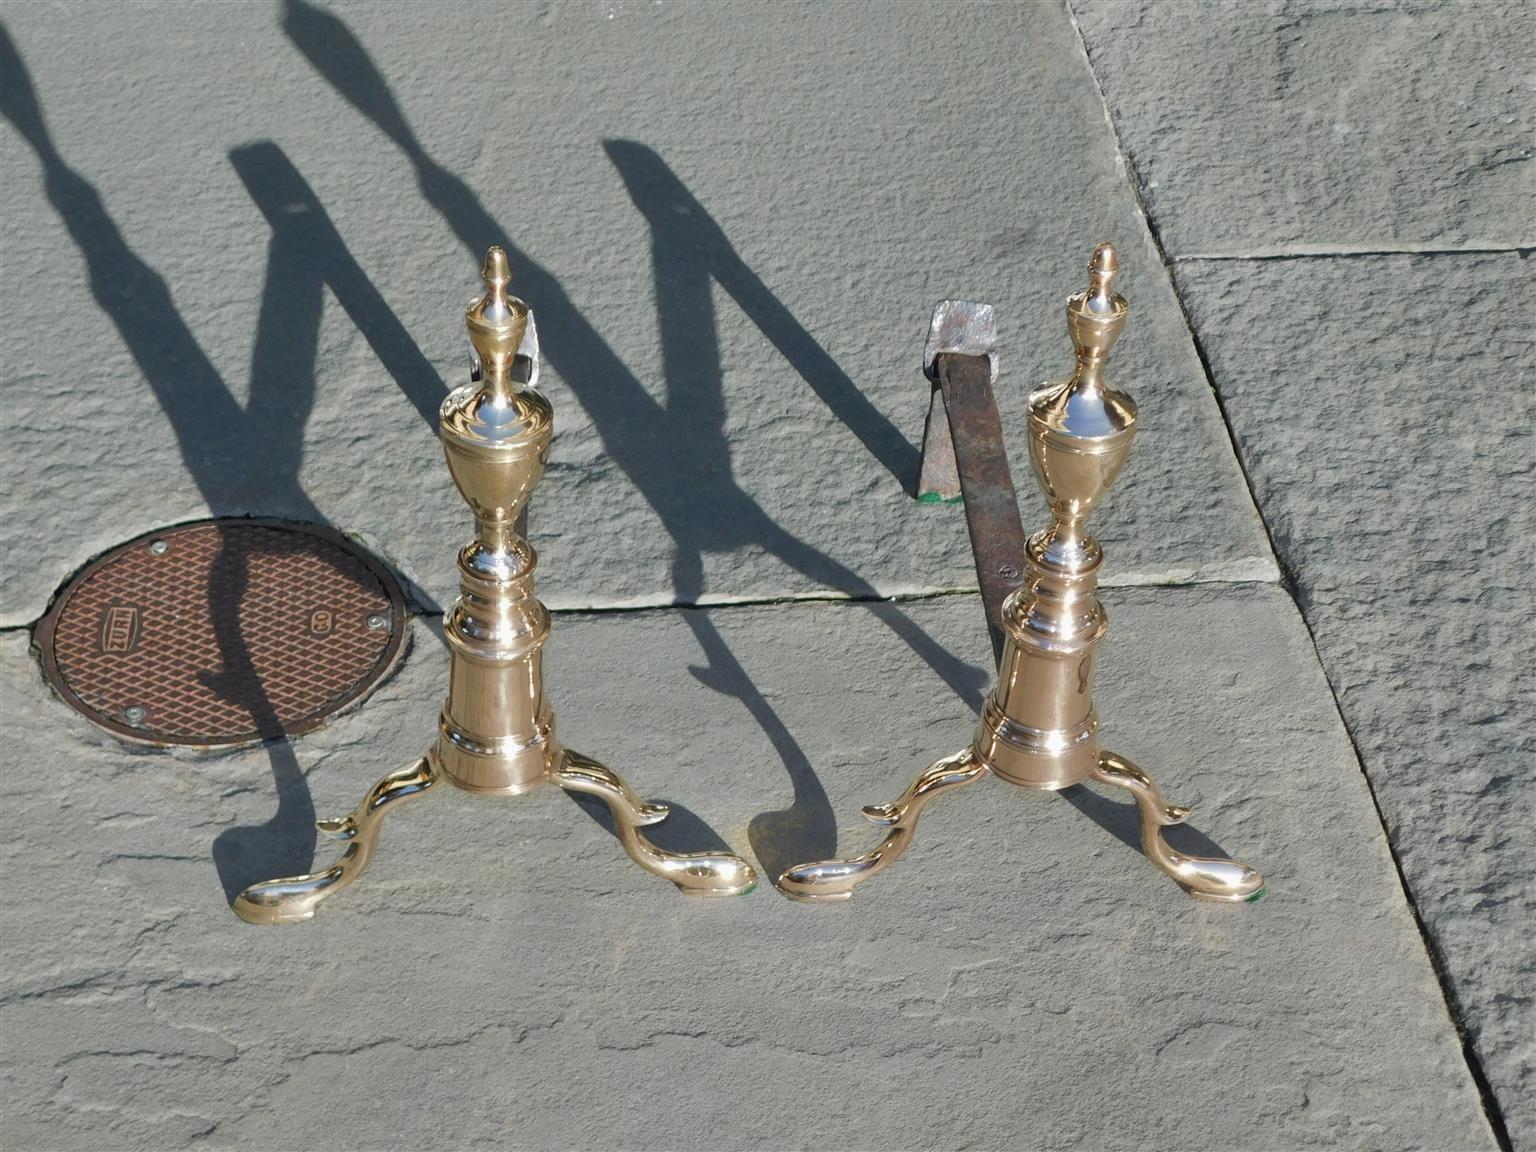 Pair of American bell brass double urn finial andirons with circular ringed plinths, spur legs, wrought iron rear dog legs, and resting on original slipper feet. New York, Late 18th Century. Wrought iron dogs legs can be adjusted in length by